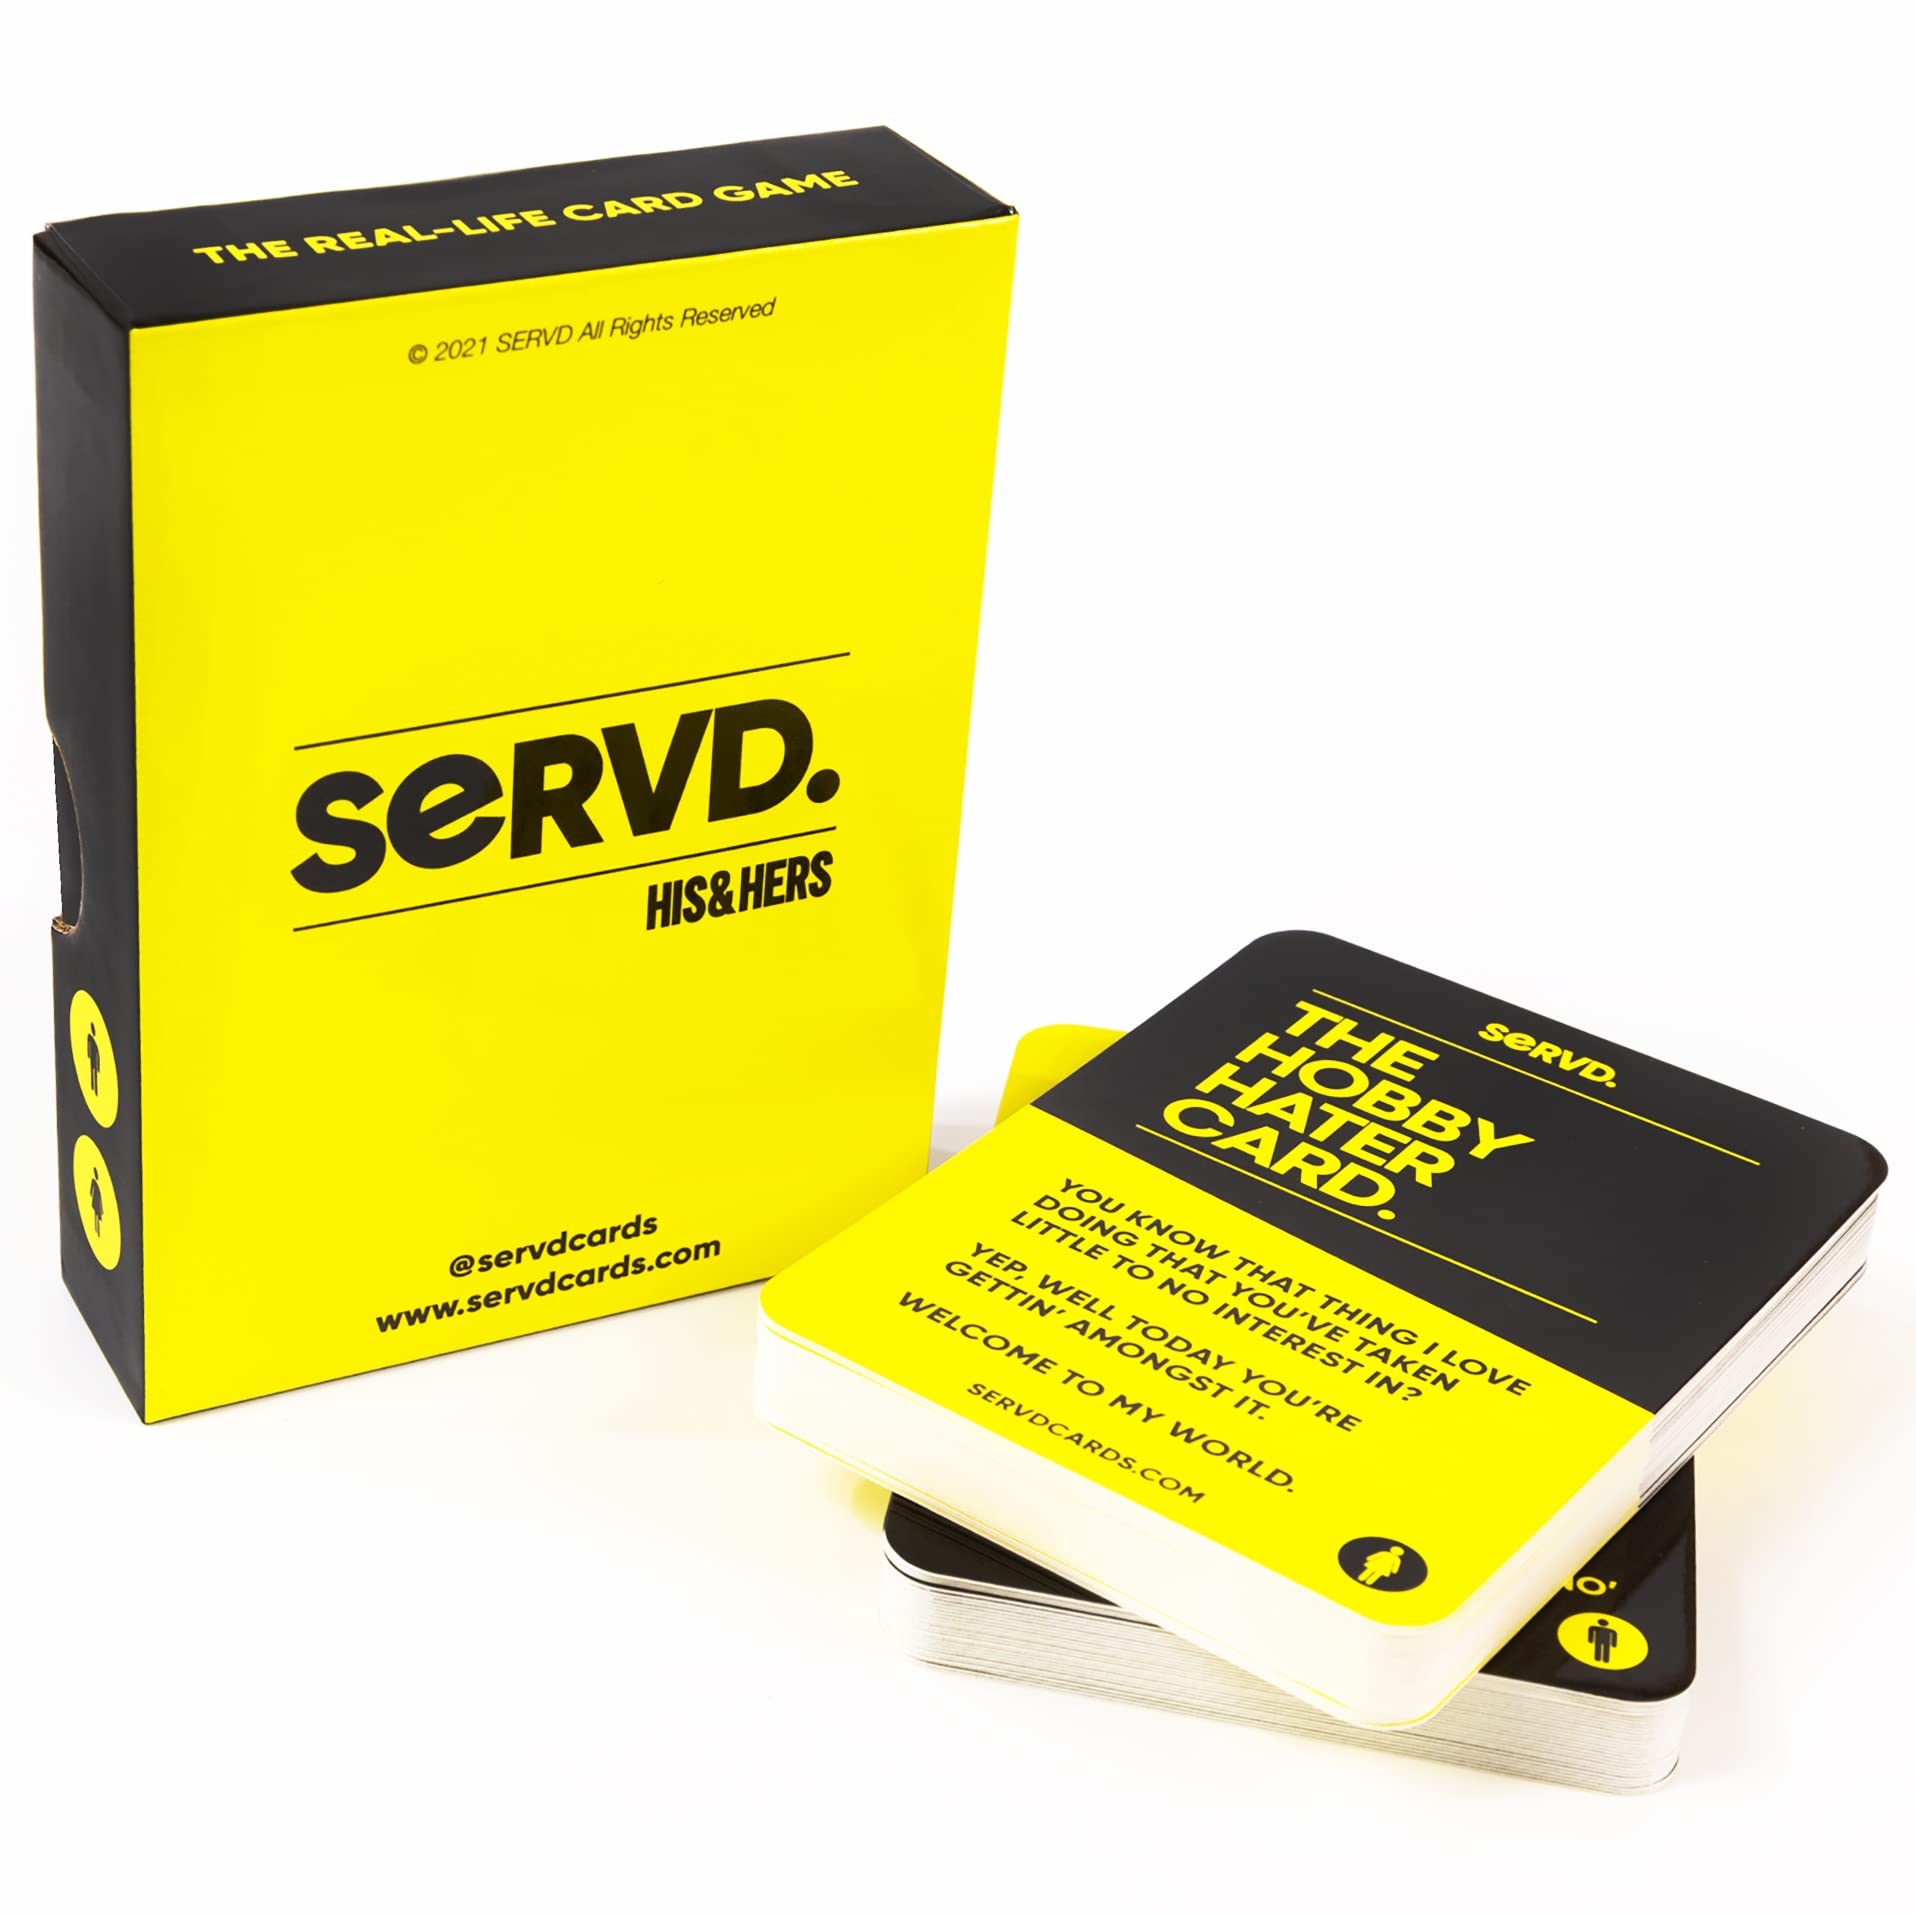 SERVD - His & Hers - The Hilarious Real-Life Couples Card Game for Adults. A Funny Couples Gift for Men and Women